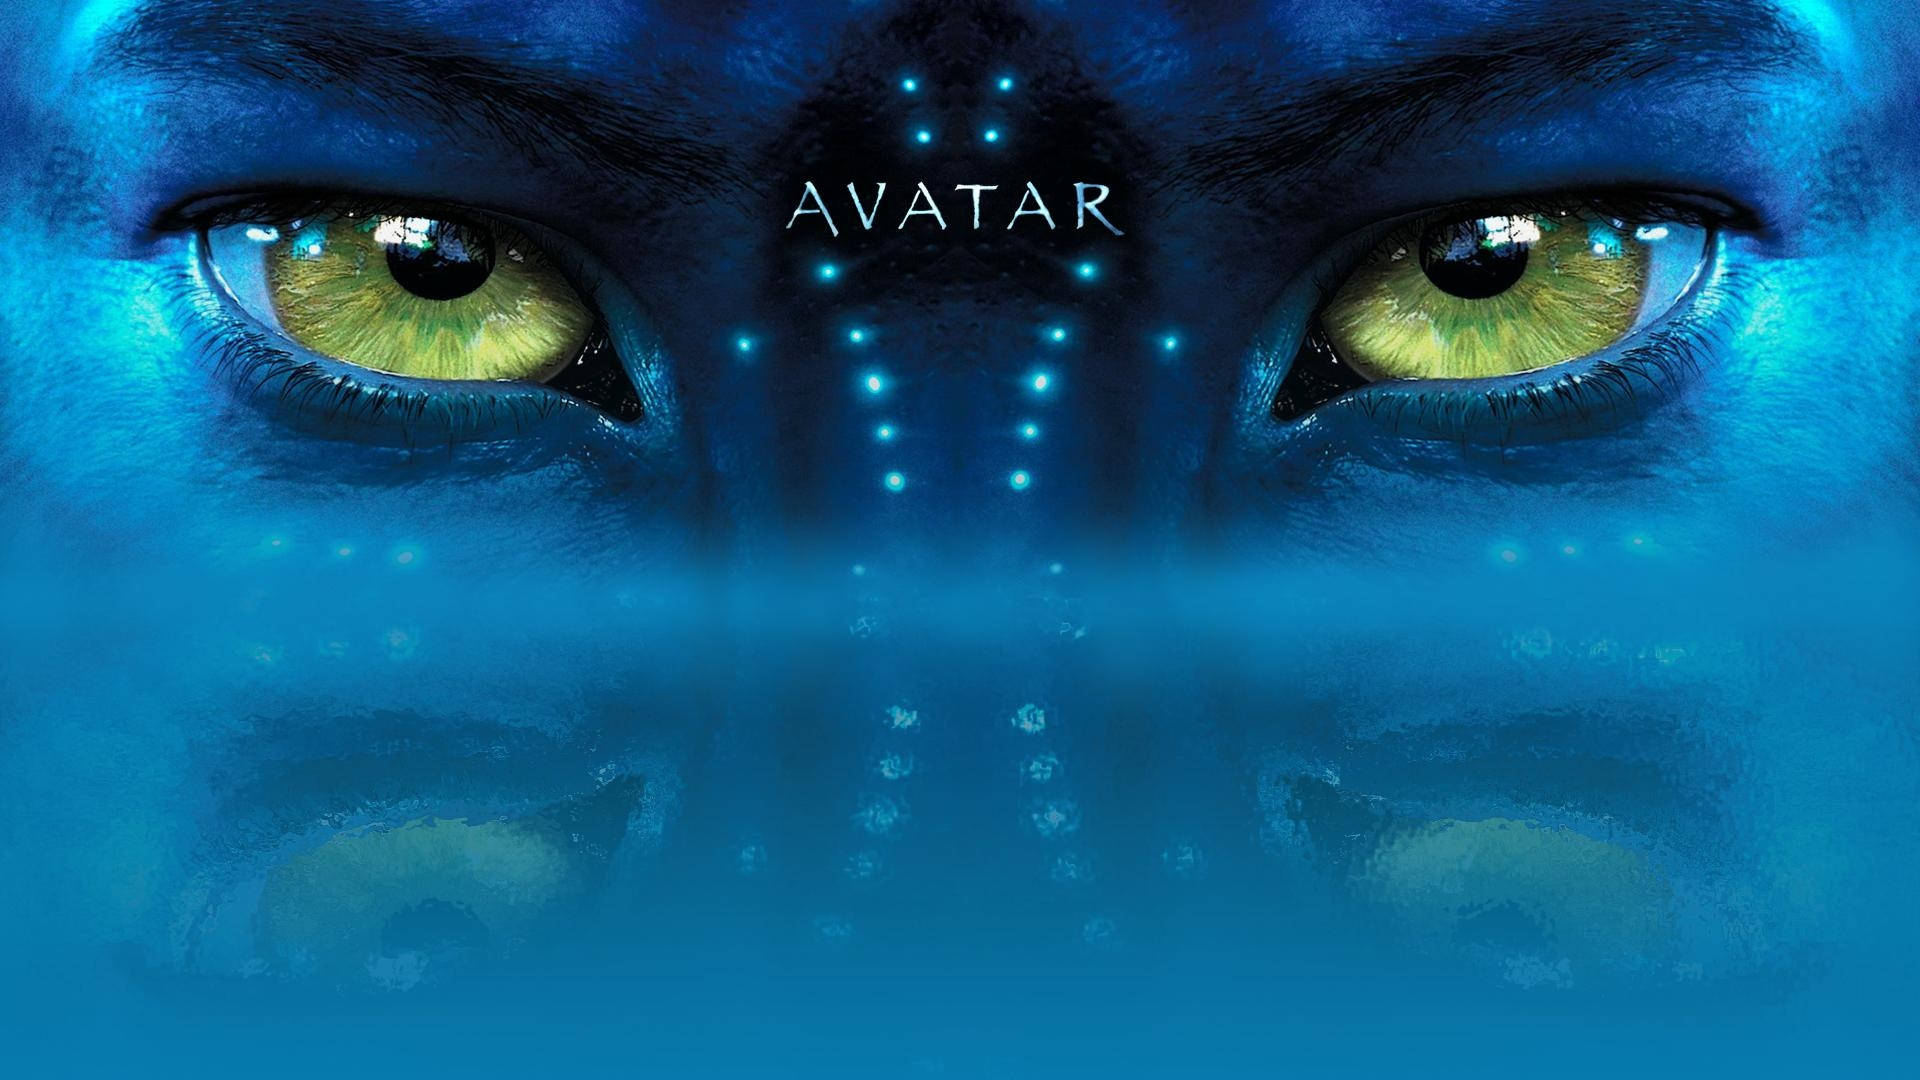 Free Avatar Hd Wallpaper Downloads, [100+] Avatar Hd Wallpapers for FREE |  